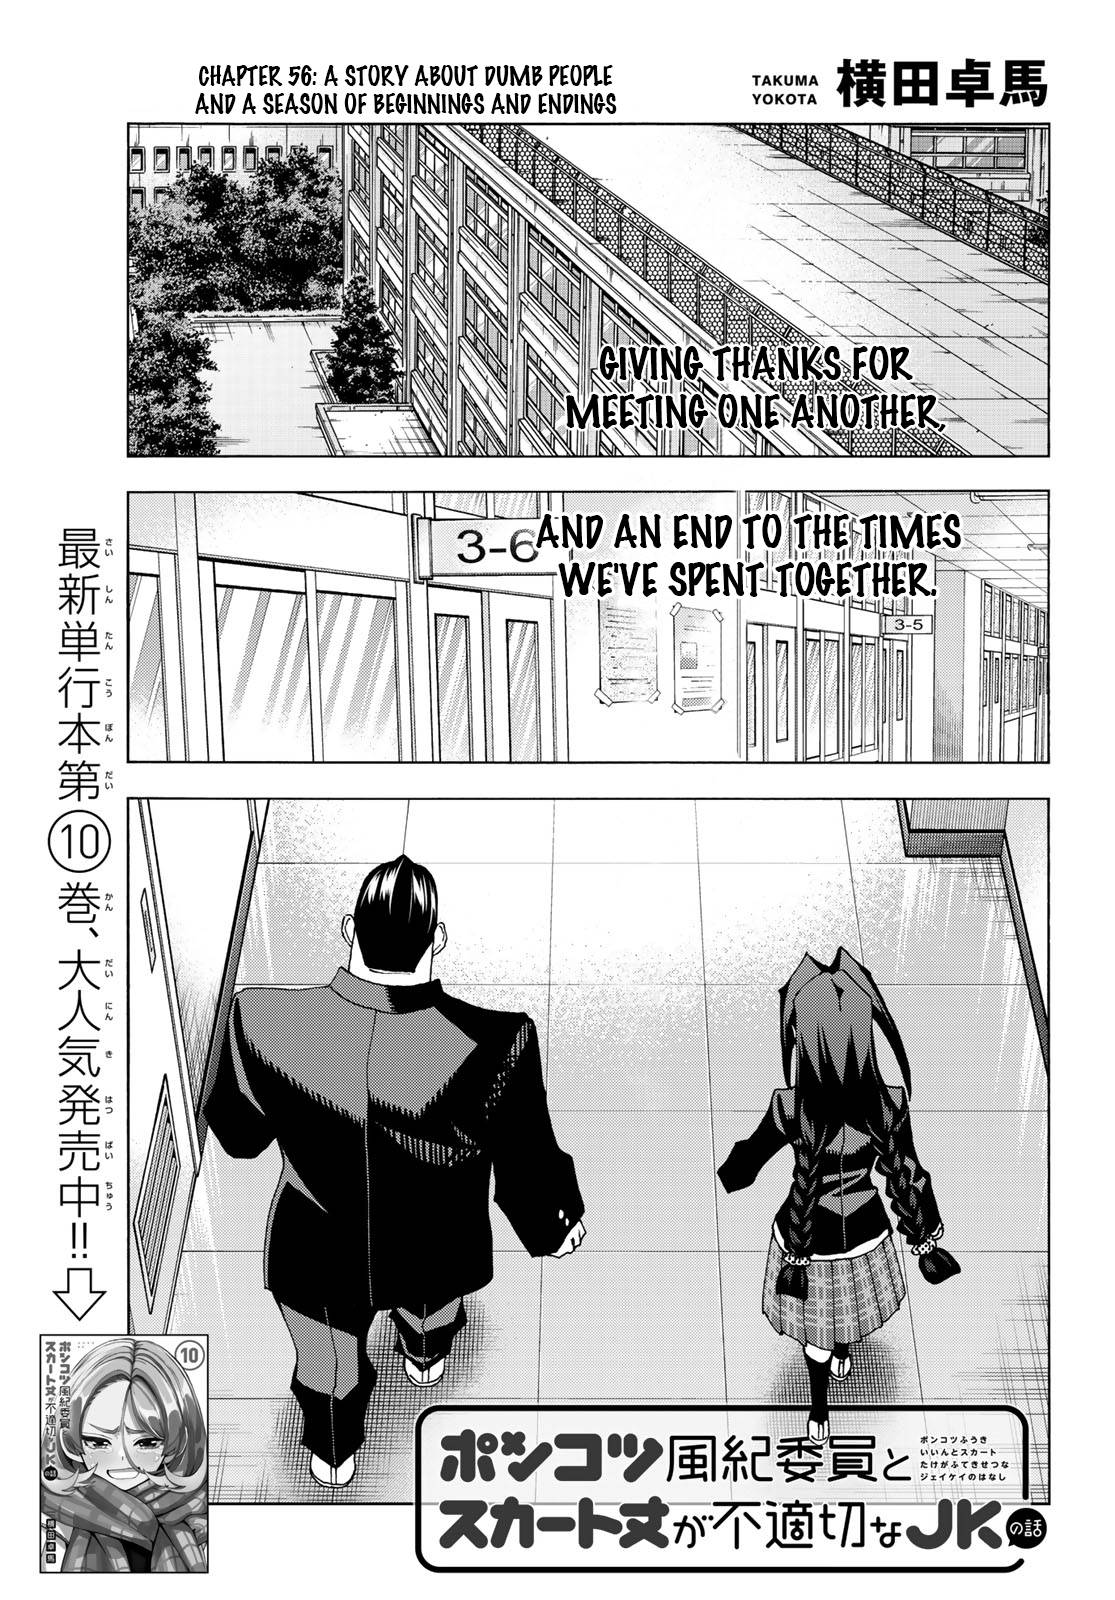 Classroom of the Elite, Chapter 56 - Classroom of the Elite Manga Online